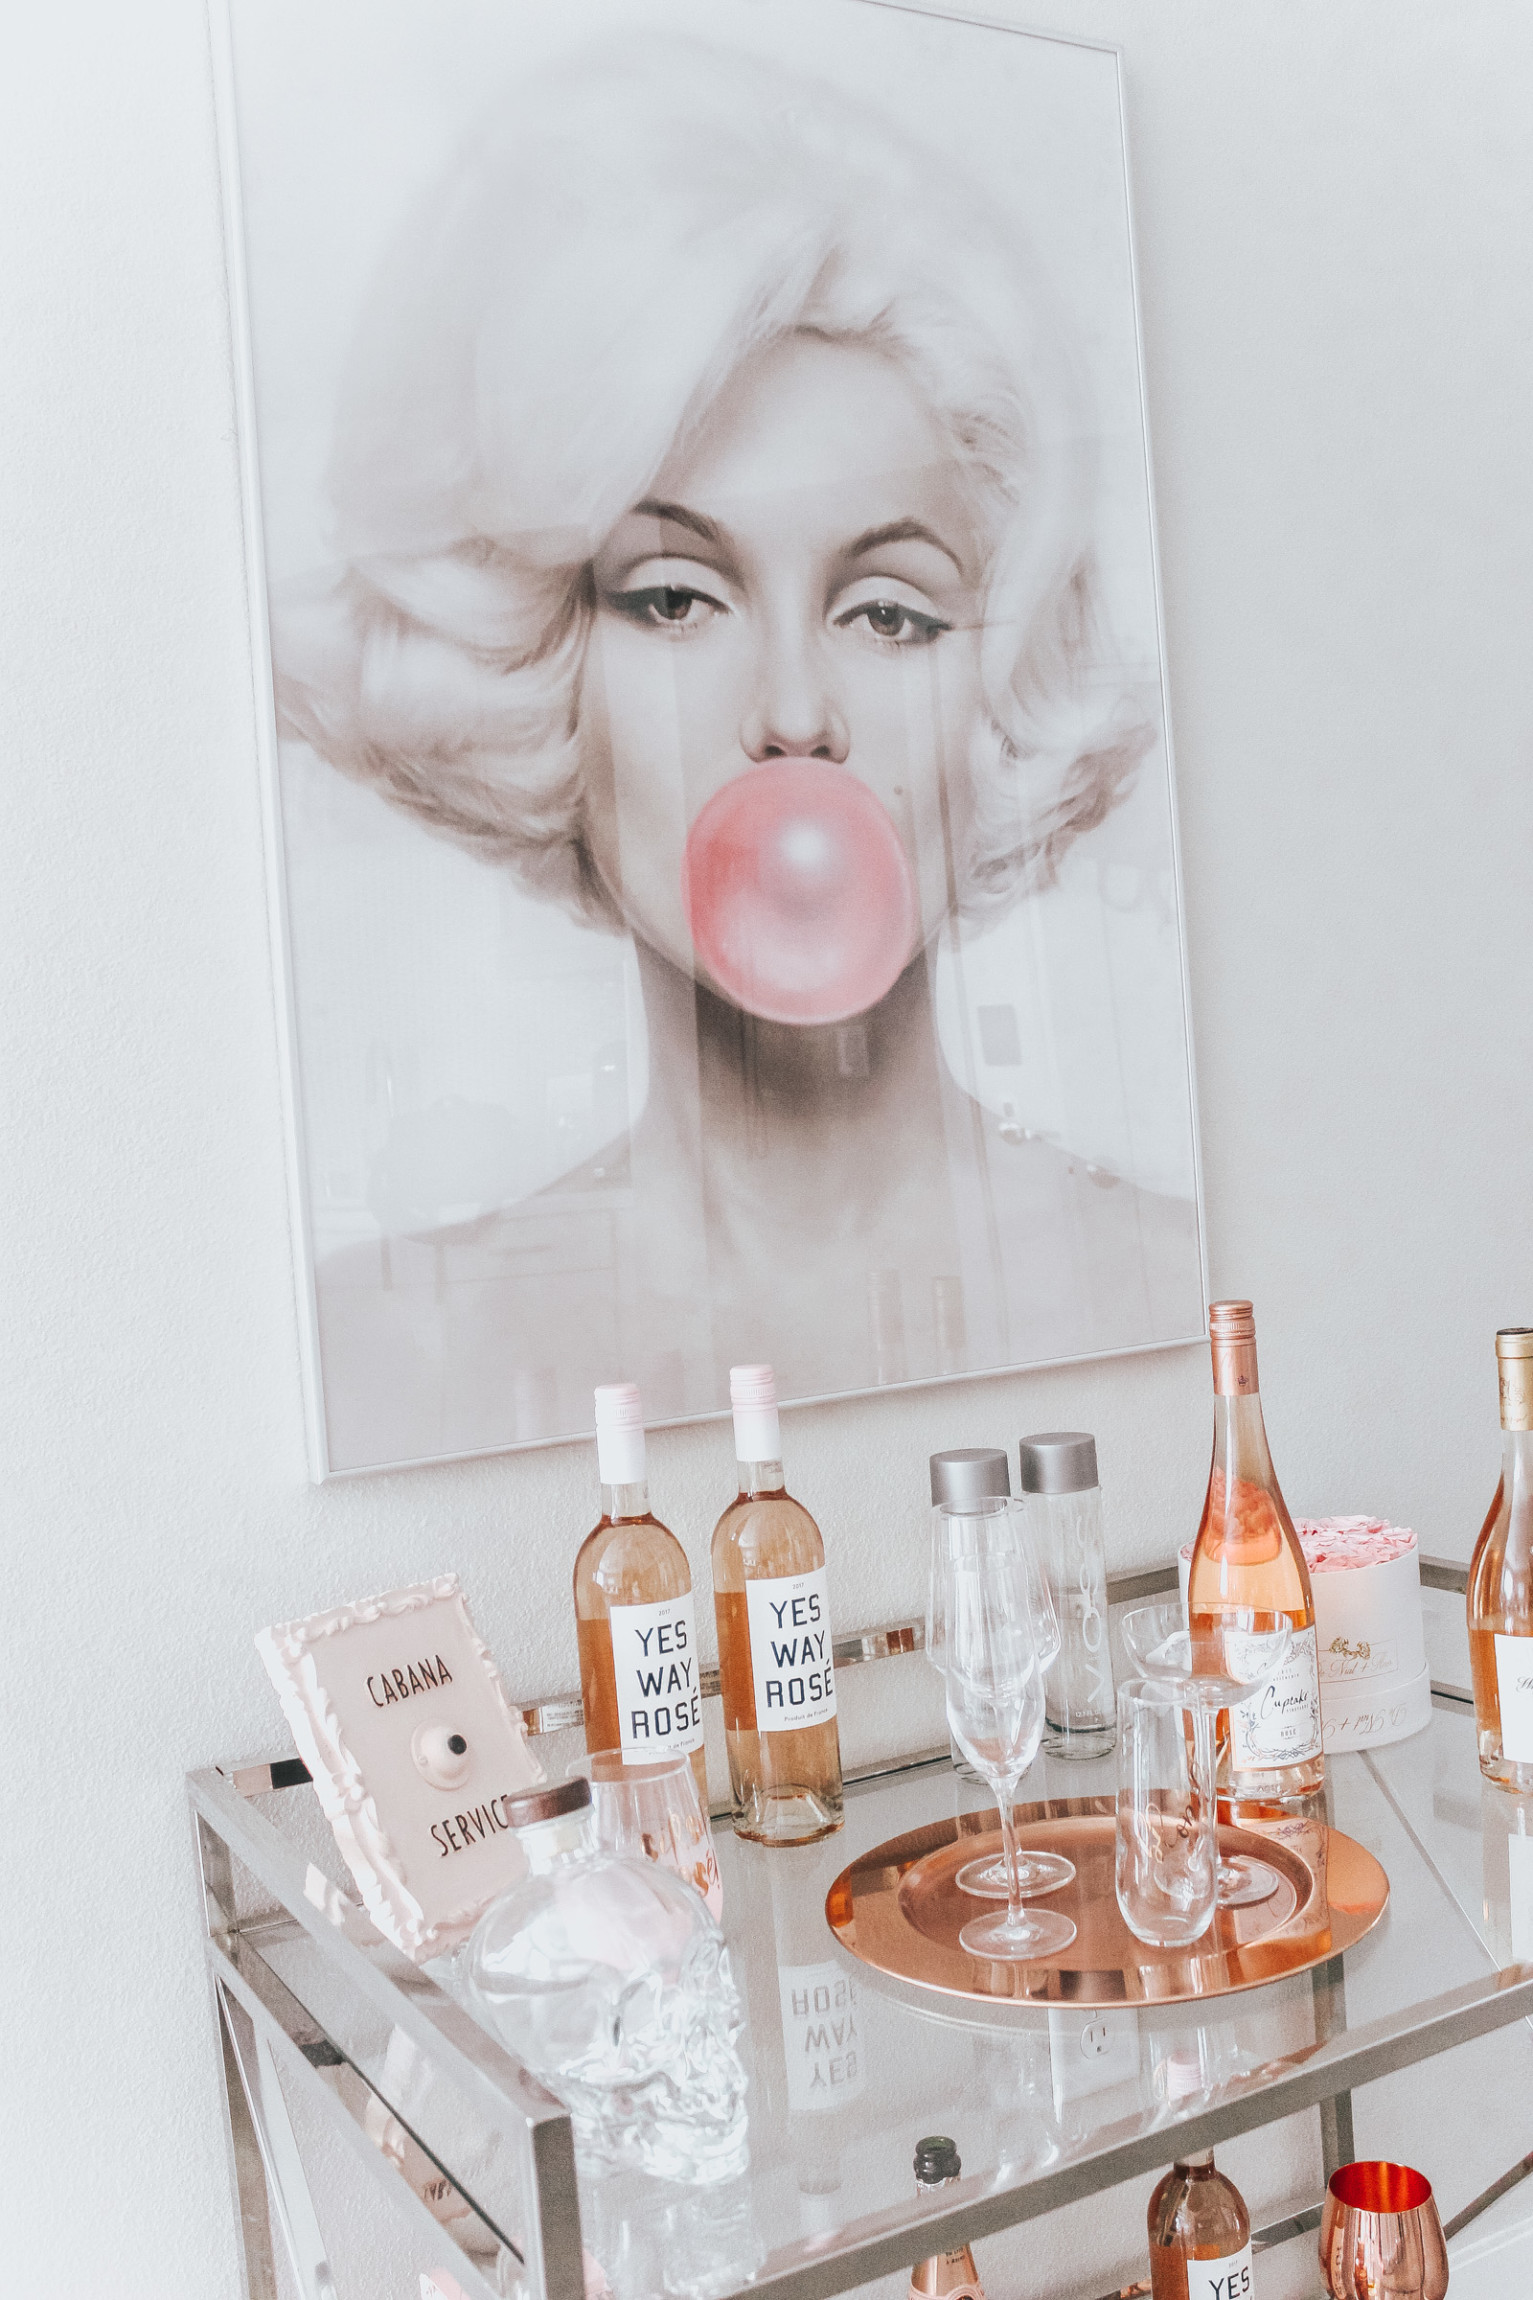 Chic Rosé Bart Cart | Marilyn Monroe Bubble Gum | Bar Cart Styling | Cabana Service | Home Decor | Rosé & White Cart Cart | Blondie in the City by Hayley Larue